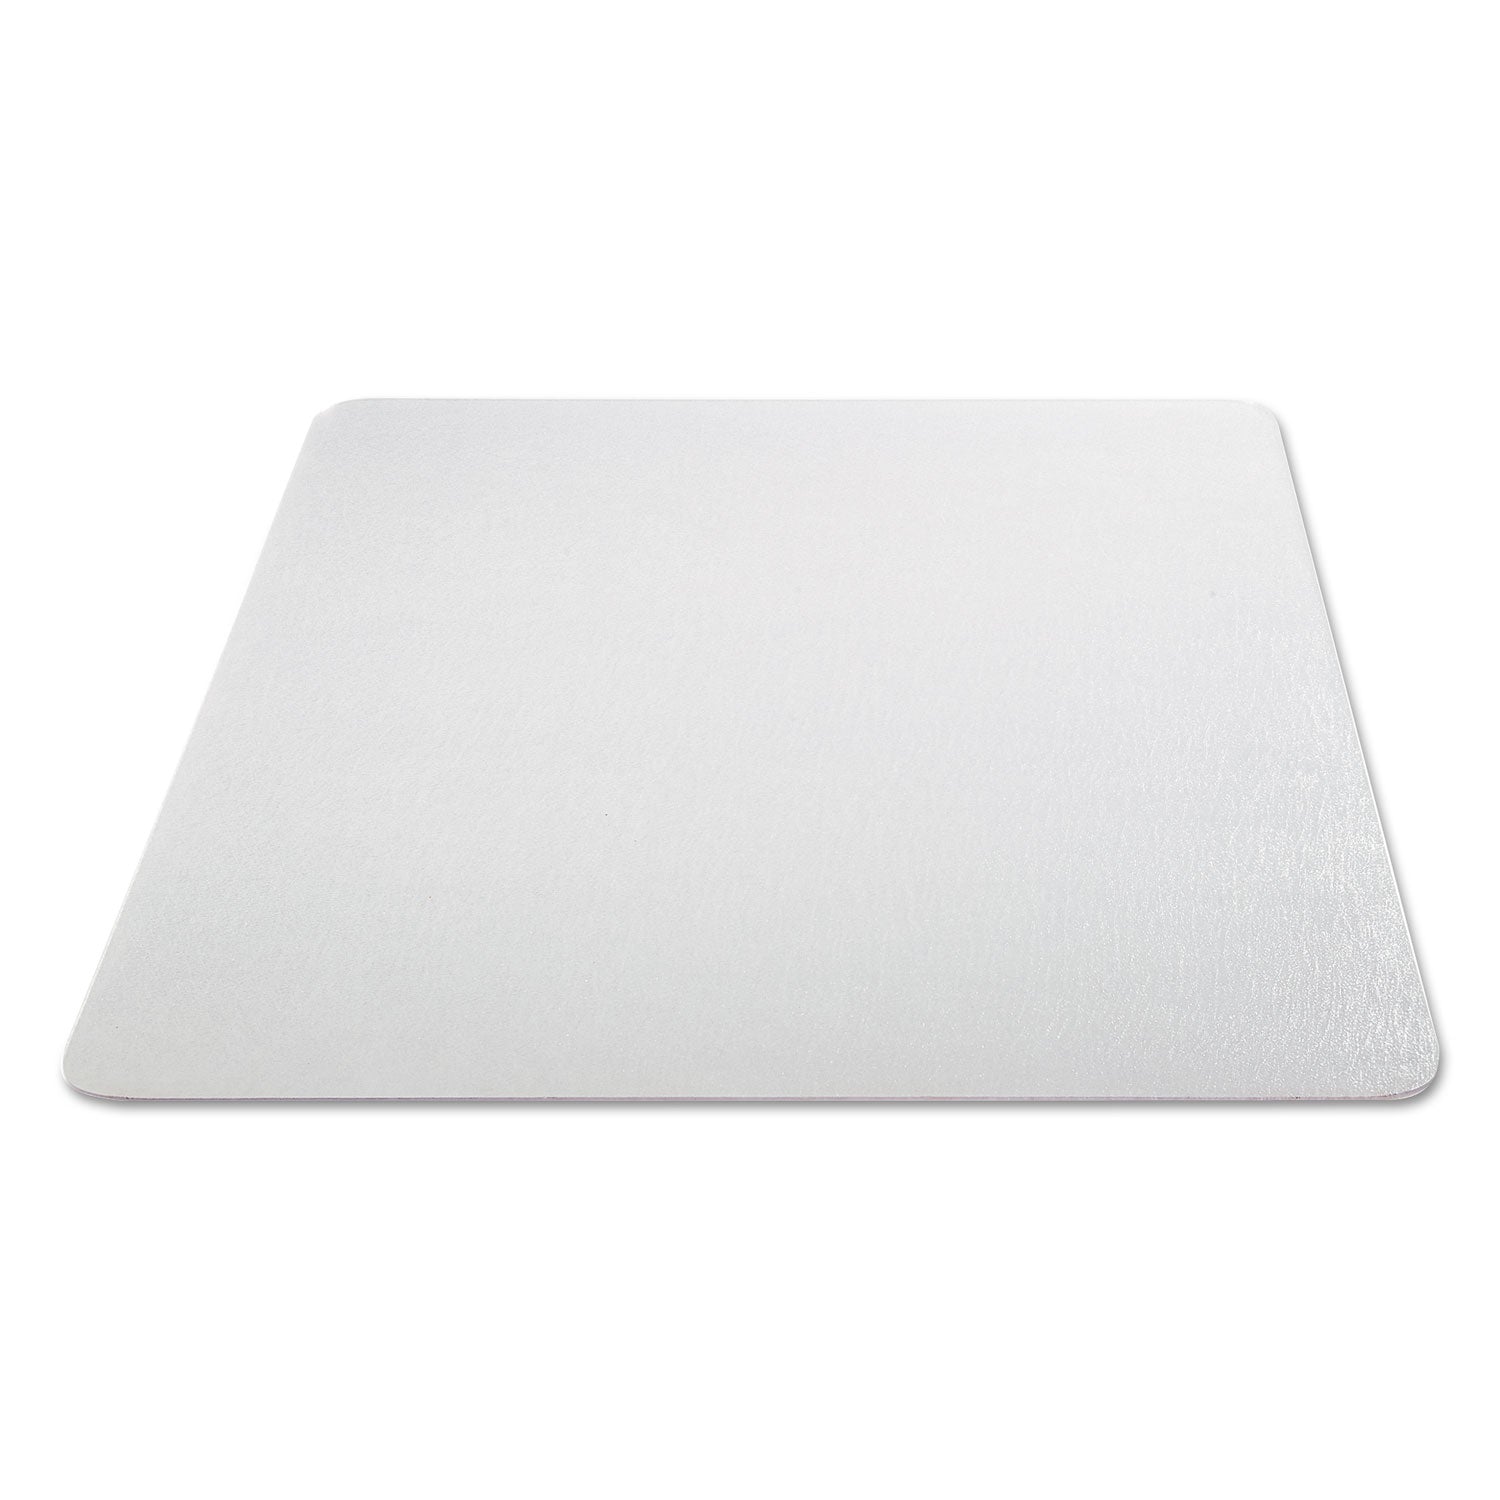 all-day-use-non-studded-chair-mat-for-hard-floors-46-x-60-rectangular-clear_alemat4660hfr - 8